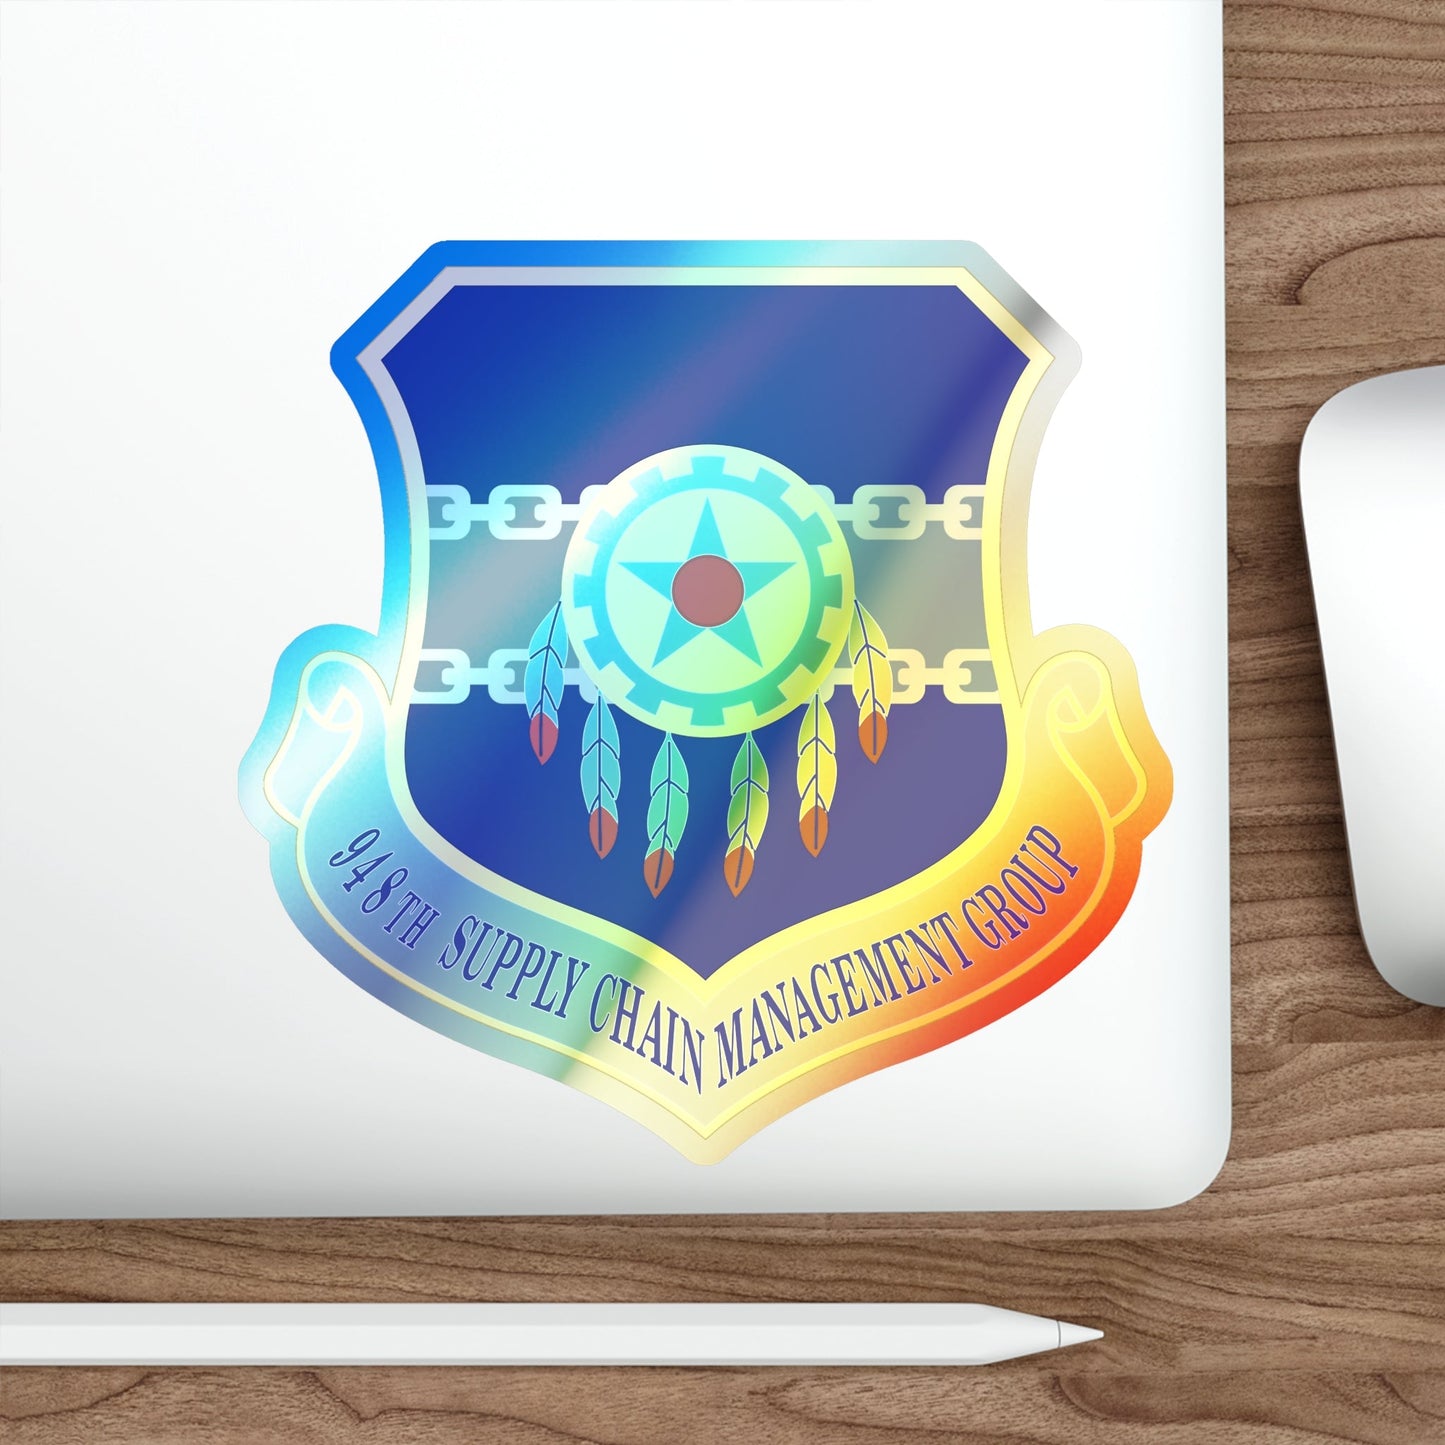 948 Supply Chain Management Group AFMC (U.S. Air Force) Holographic STICKER Die-Cut Vinyl Decal-The Sticker Space